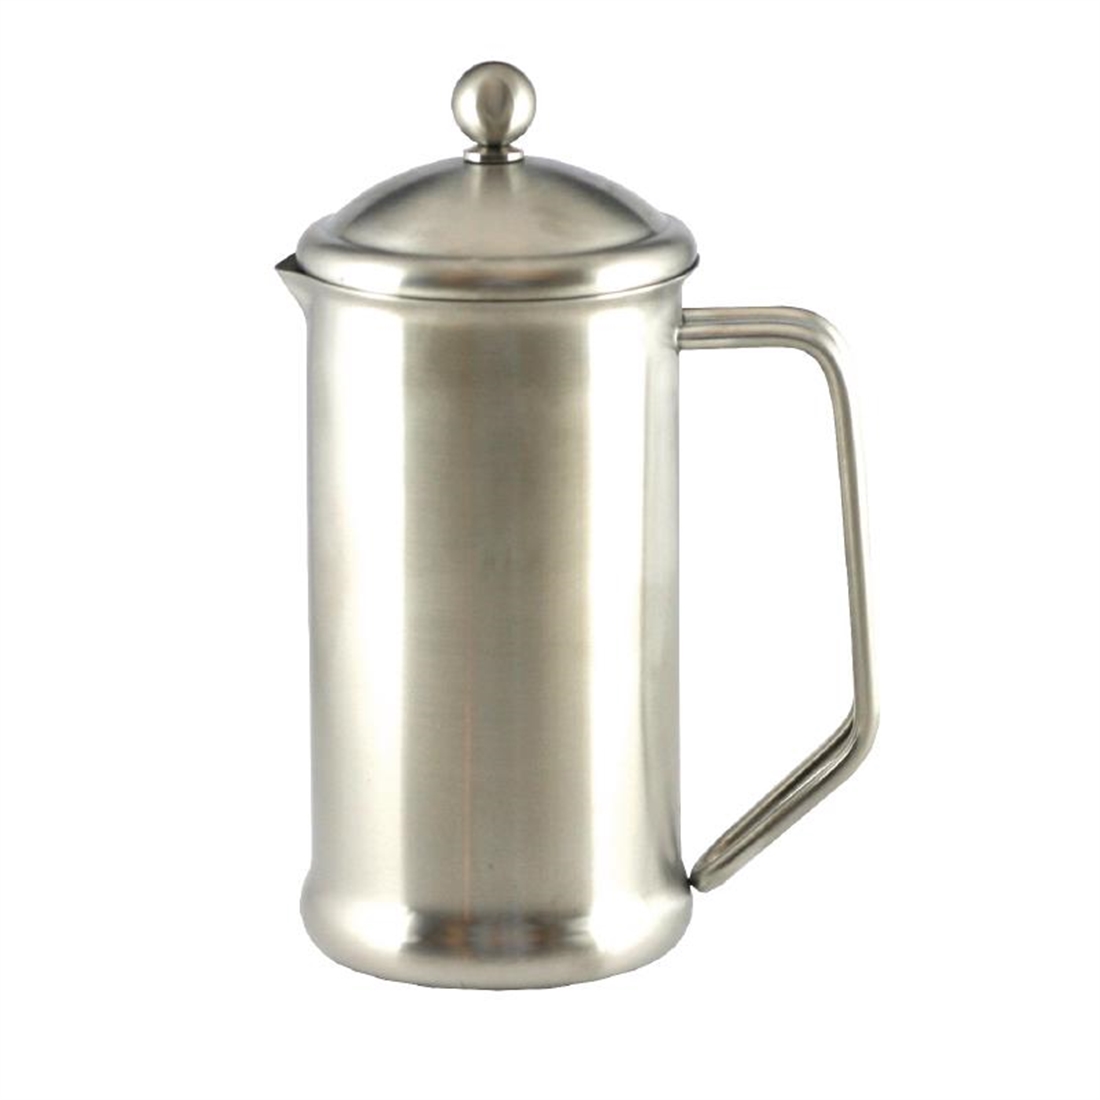 Cafetiere Stainless Steel Satin Finish 6 Cup